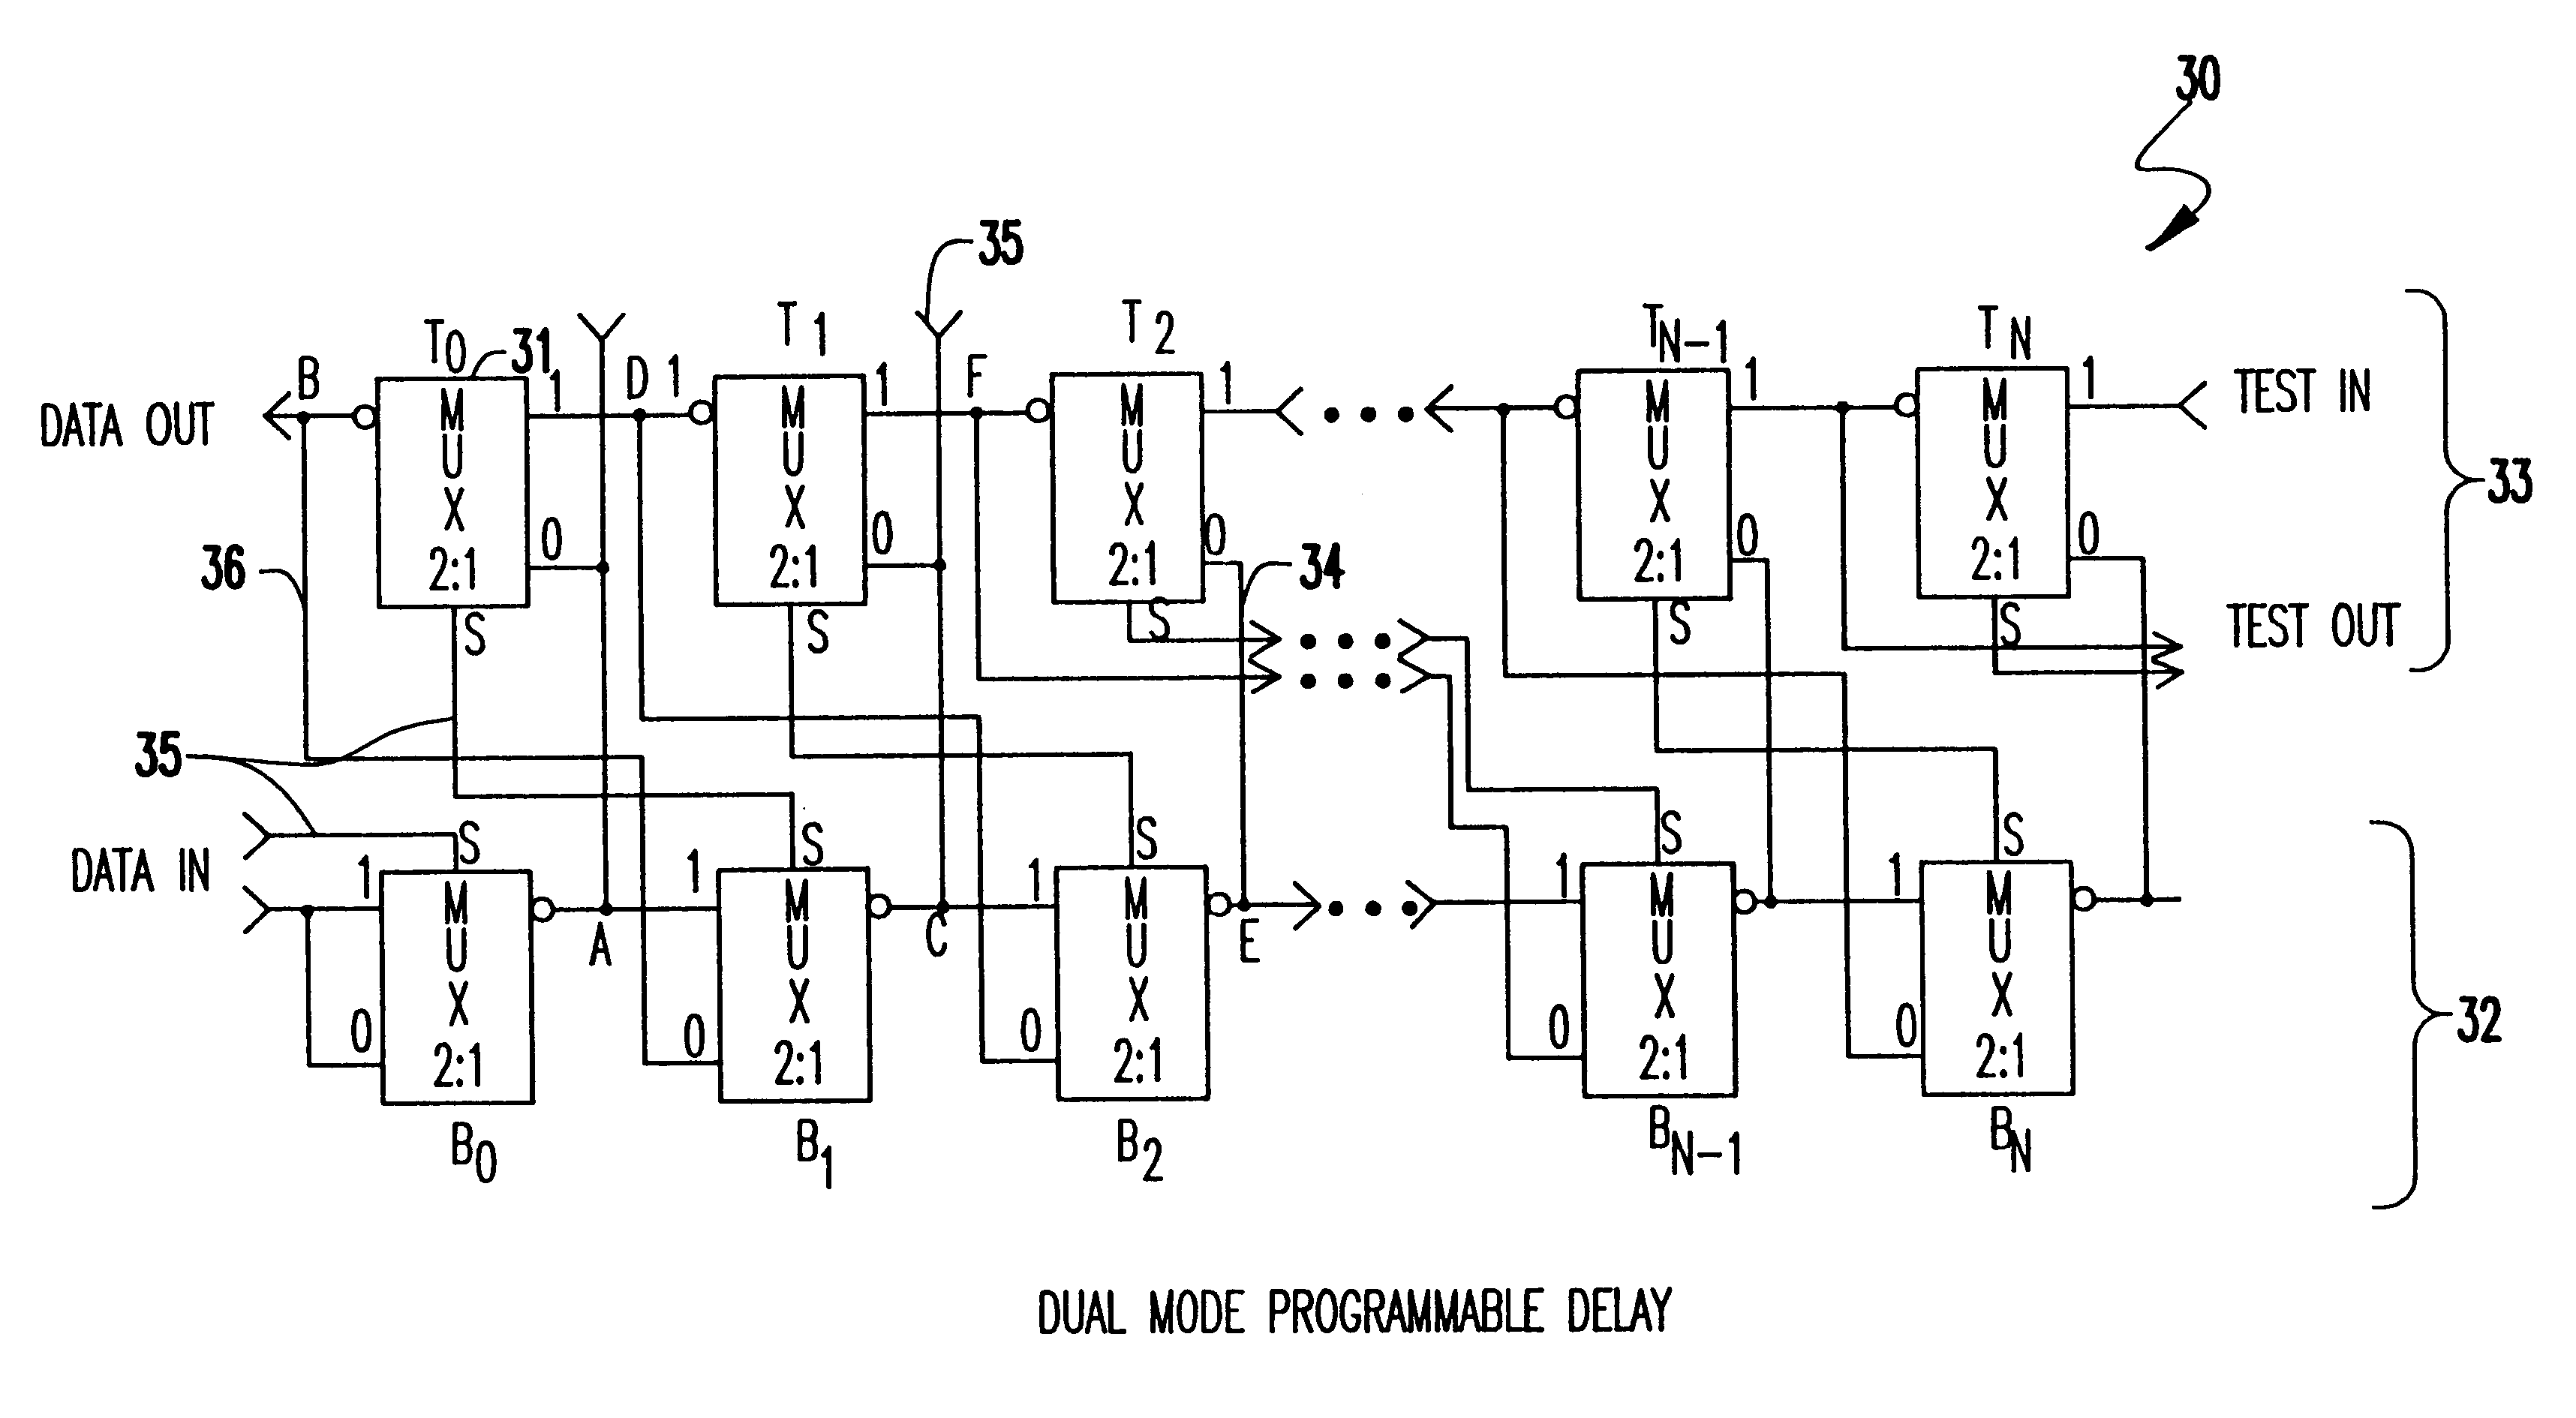 Dual mode programmable delay element